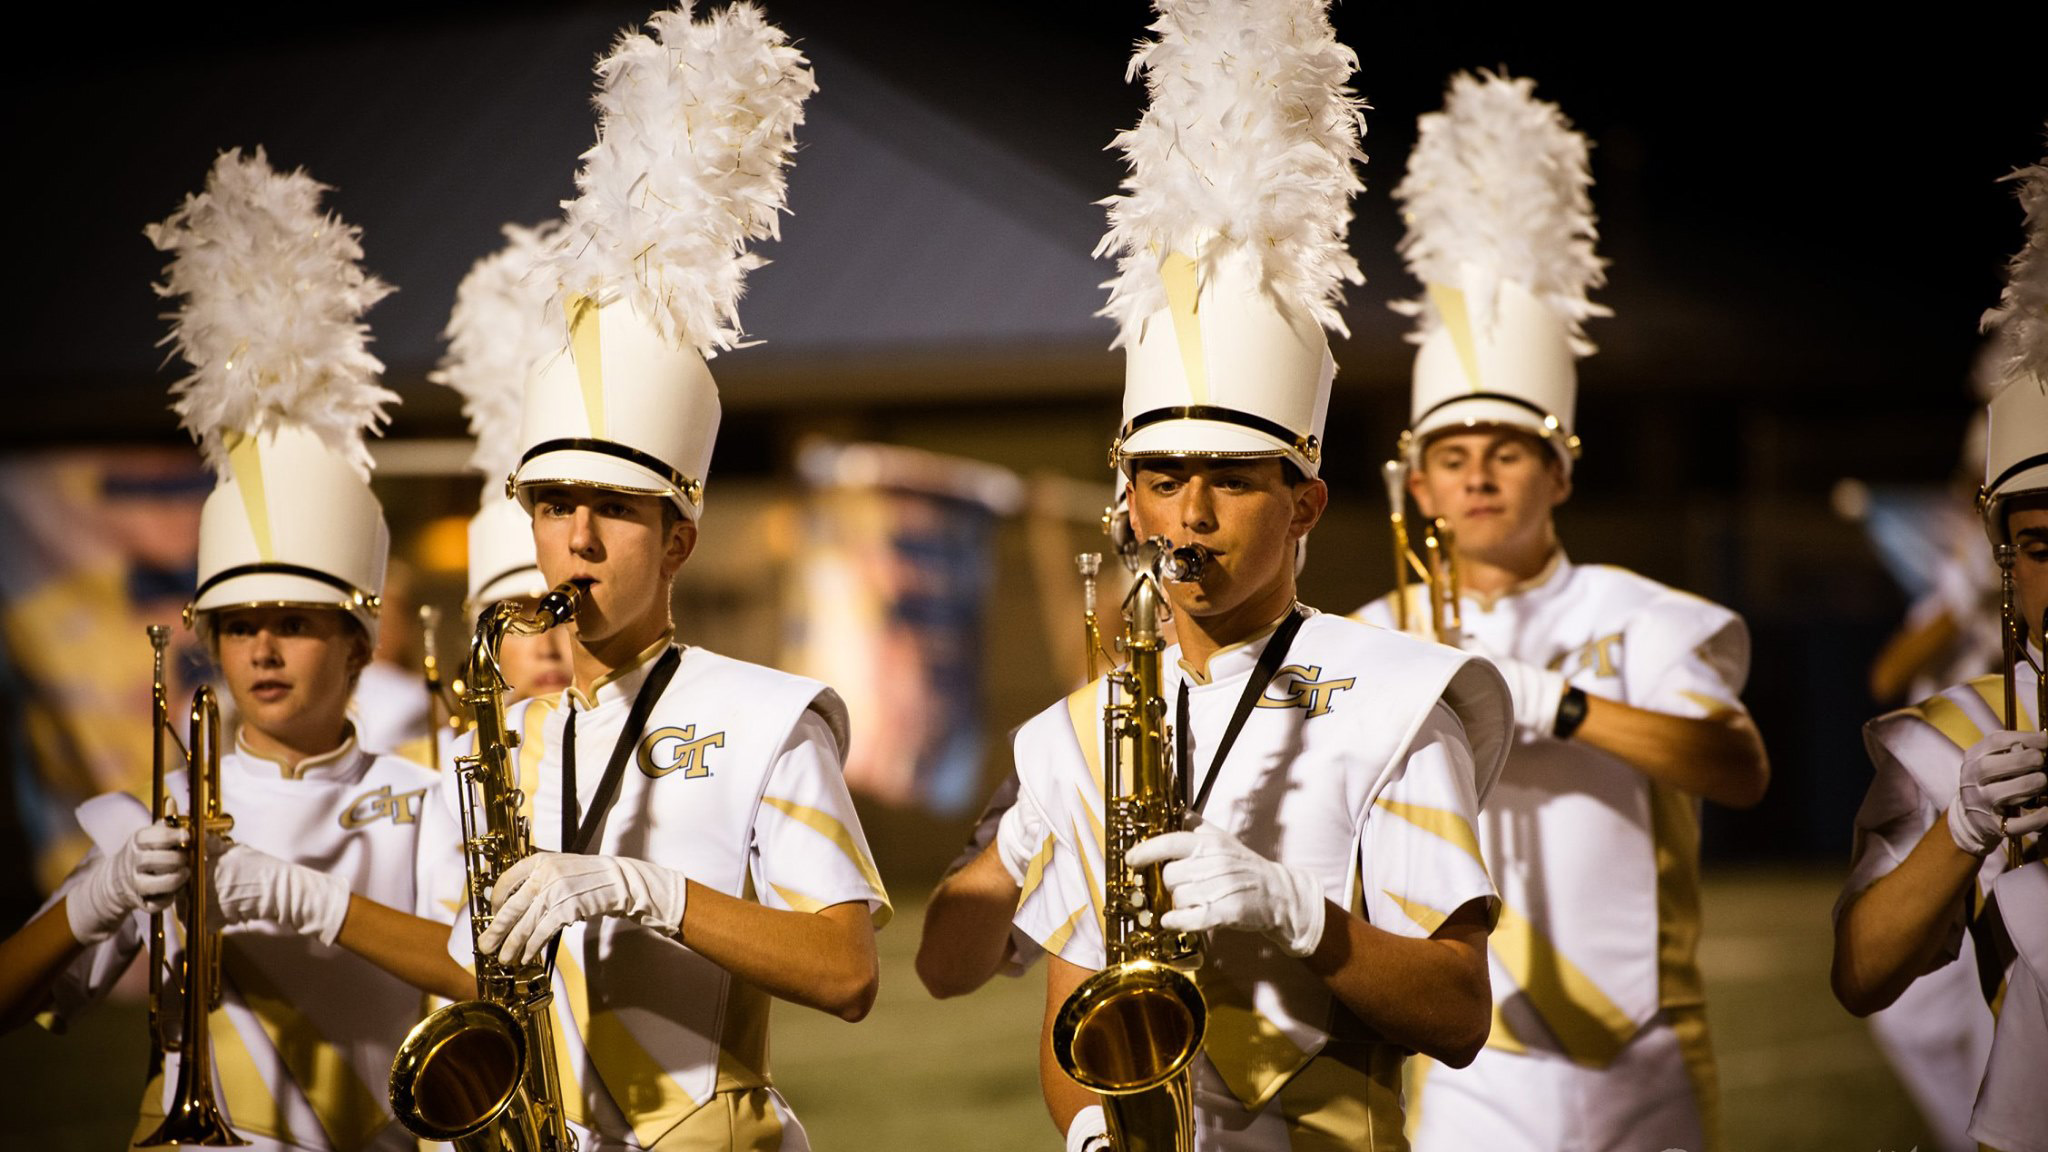 Members of the band playing saxophone.